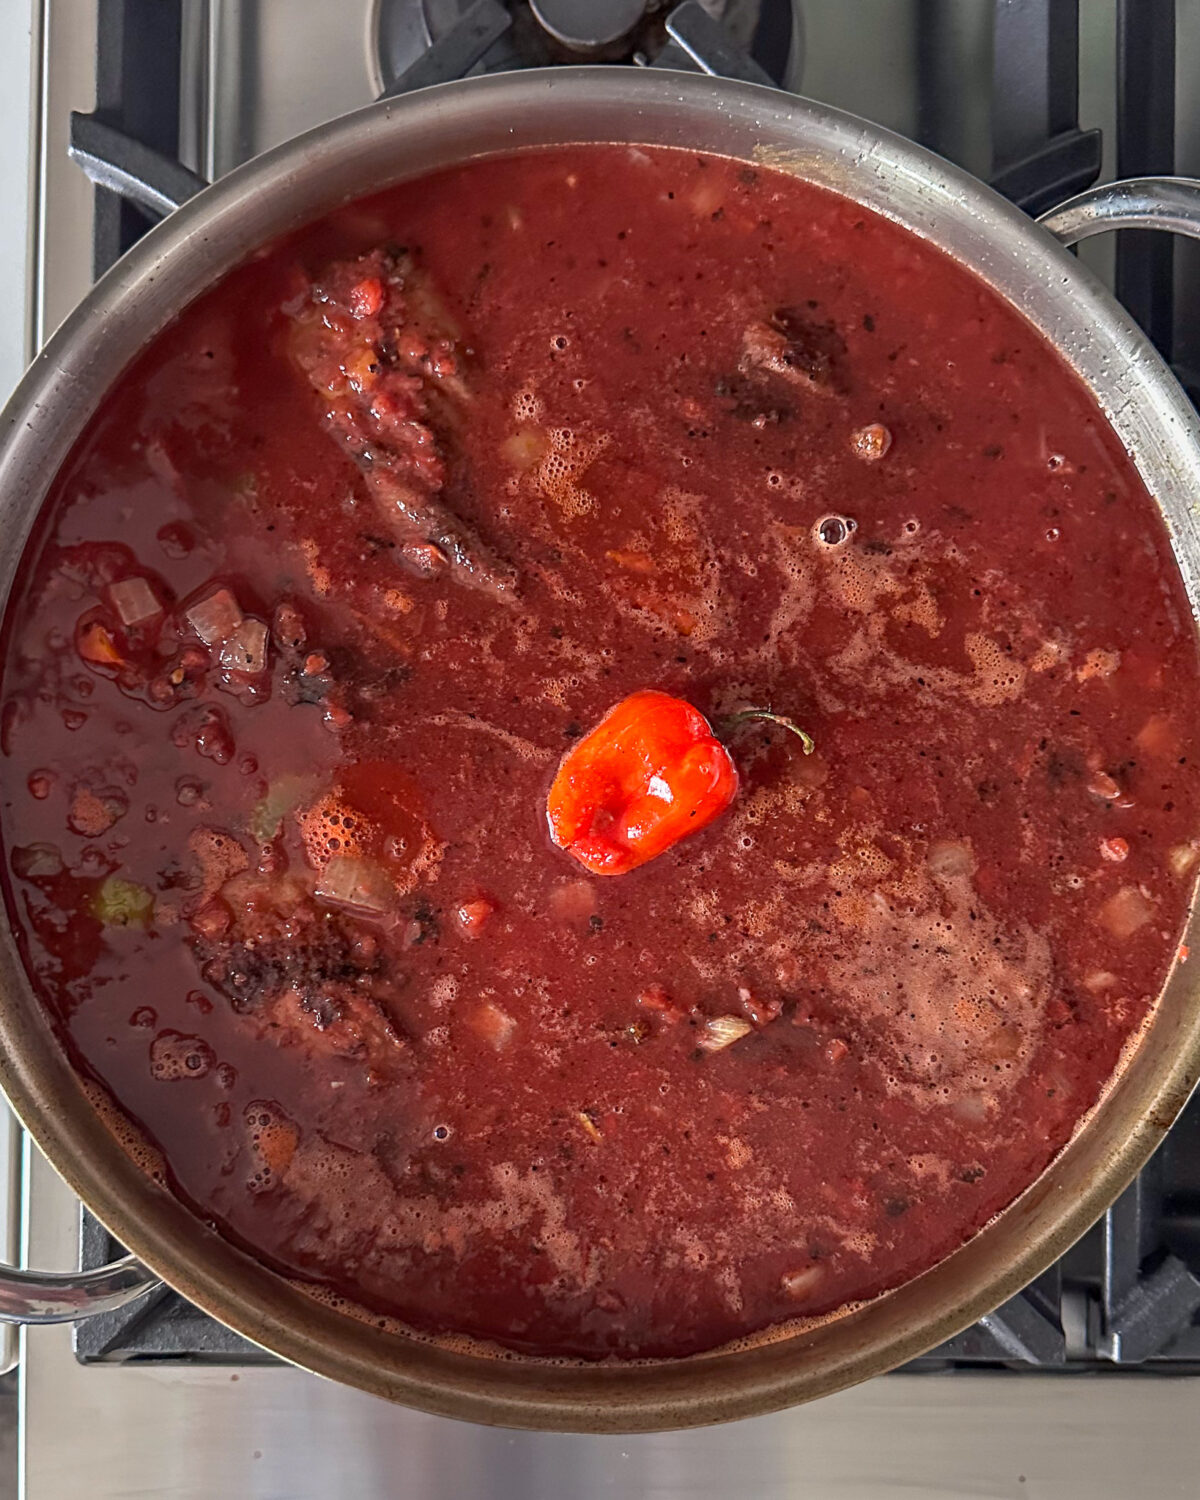 Place the browned lamb shanks into the sauce, so they are mostly submerged.